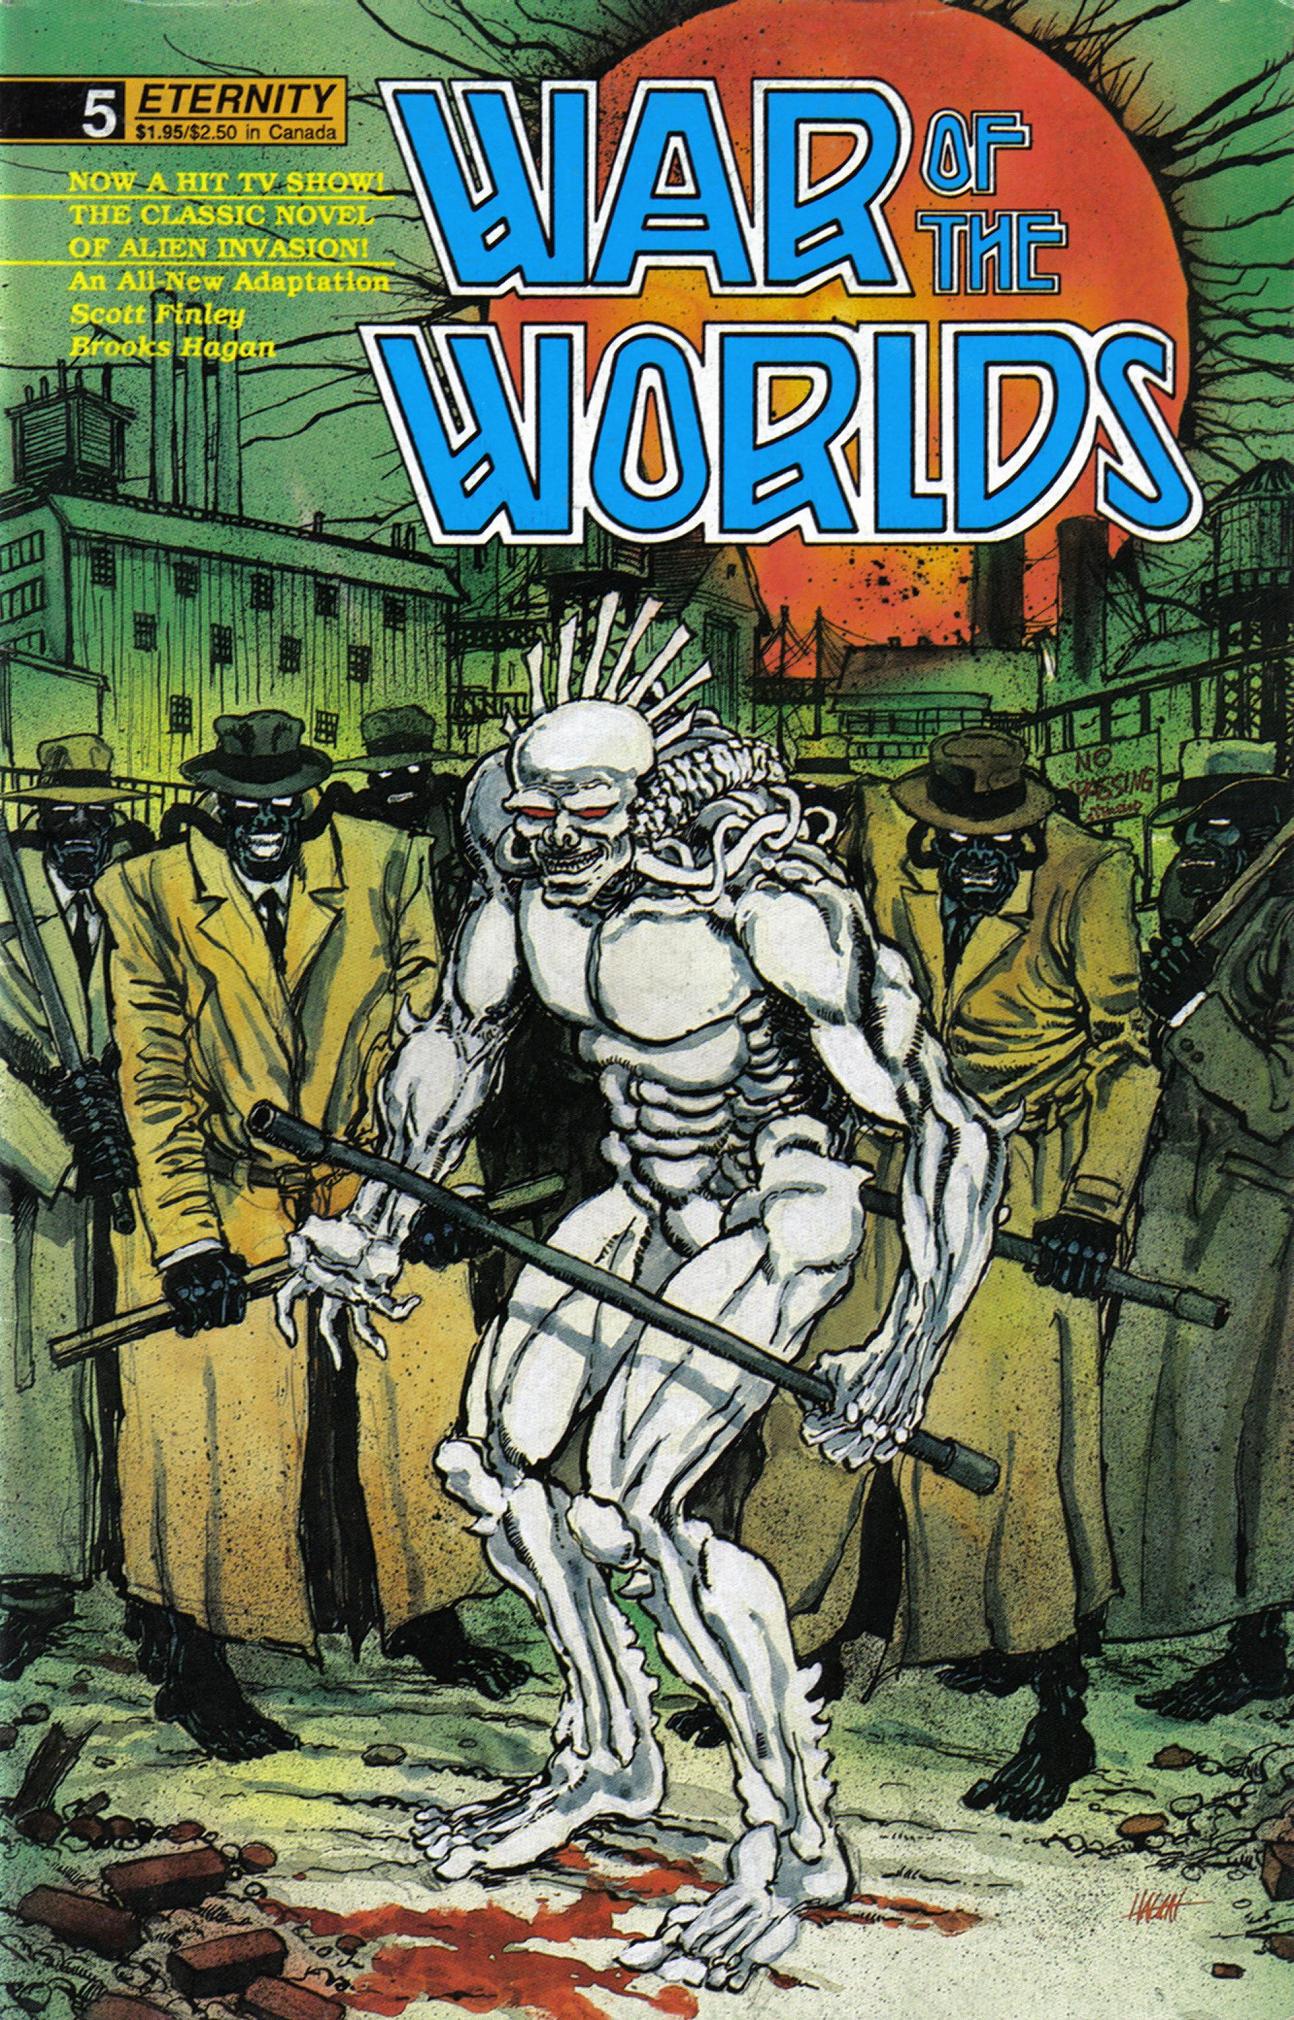 Read online War of the Worlds comic -  Issue #5 - 1